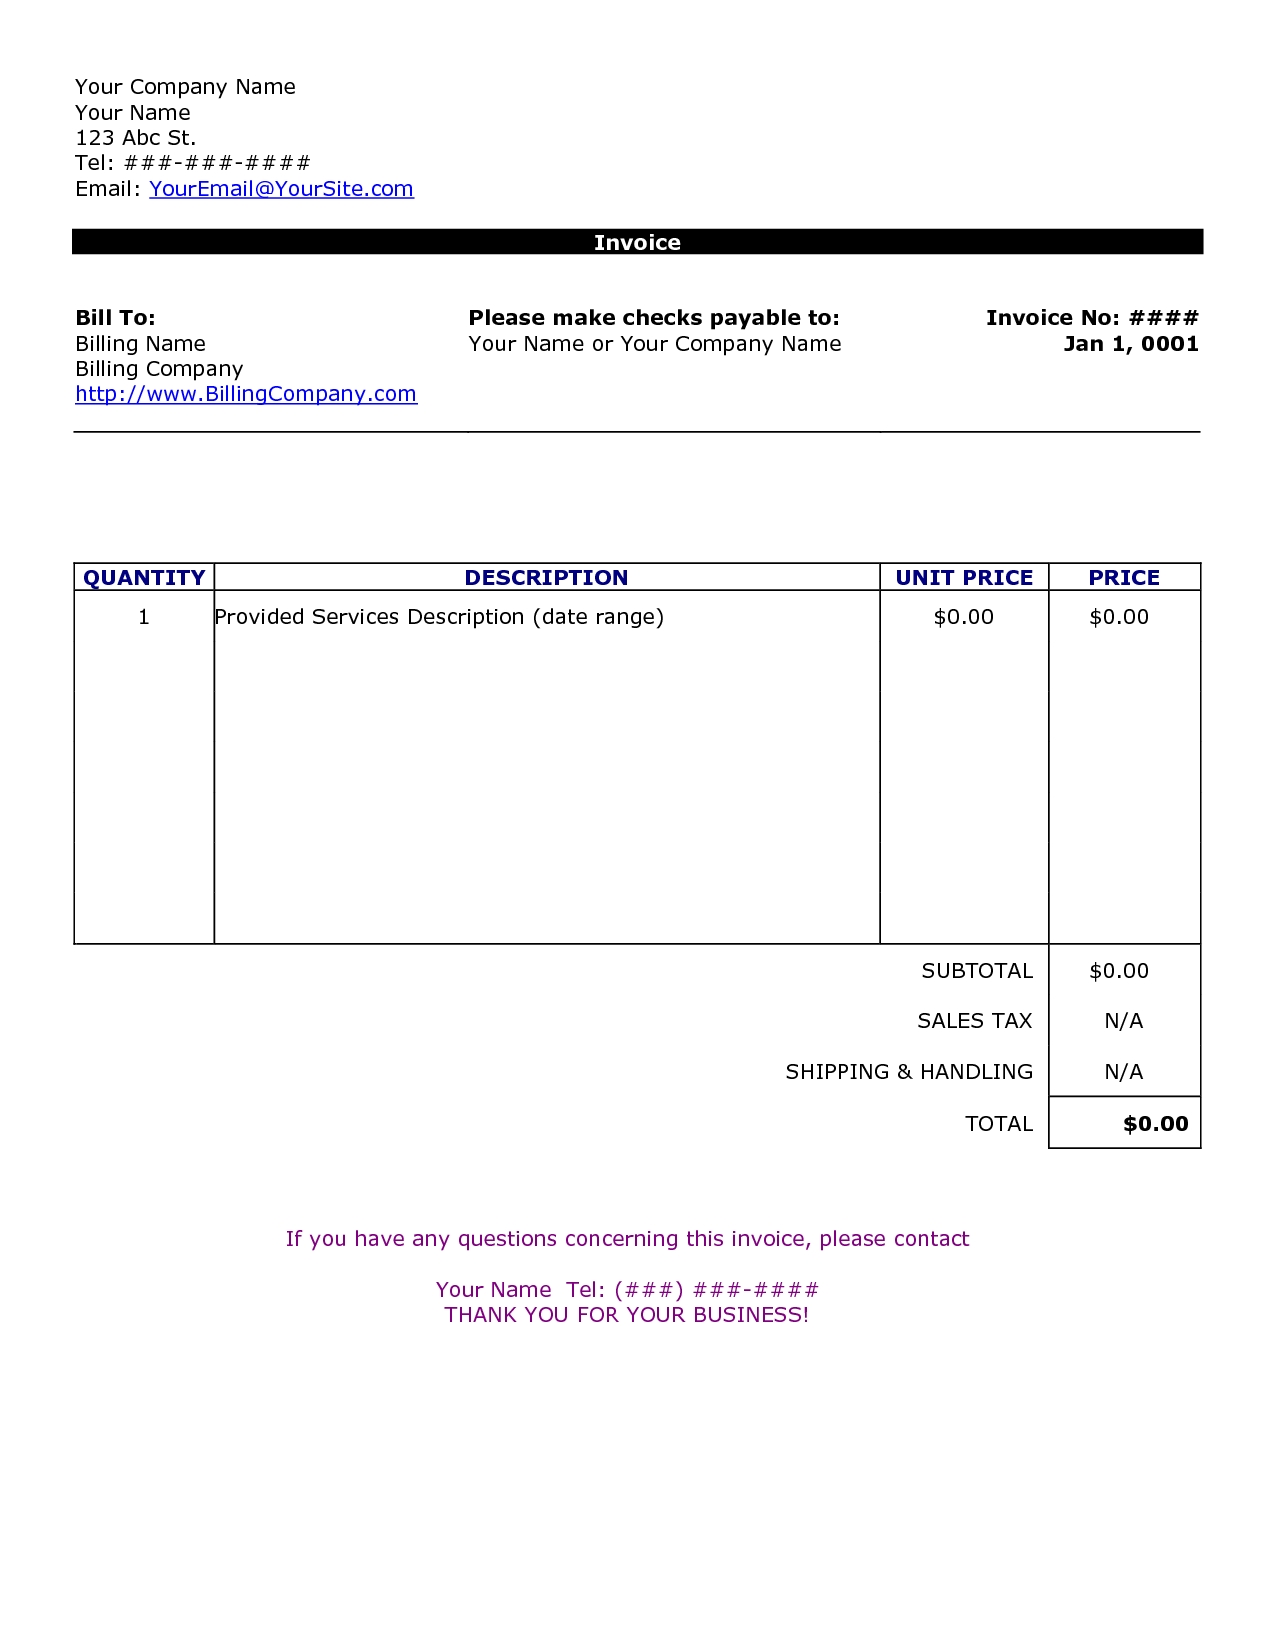 example invoice template 14 best photos of billing invoice forms invoice billing forms 1275 X 1650